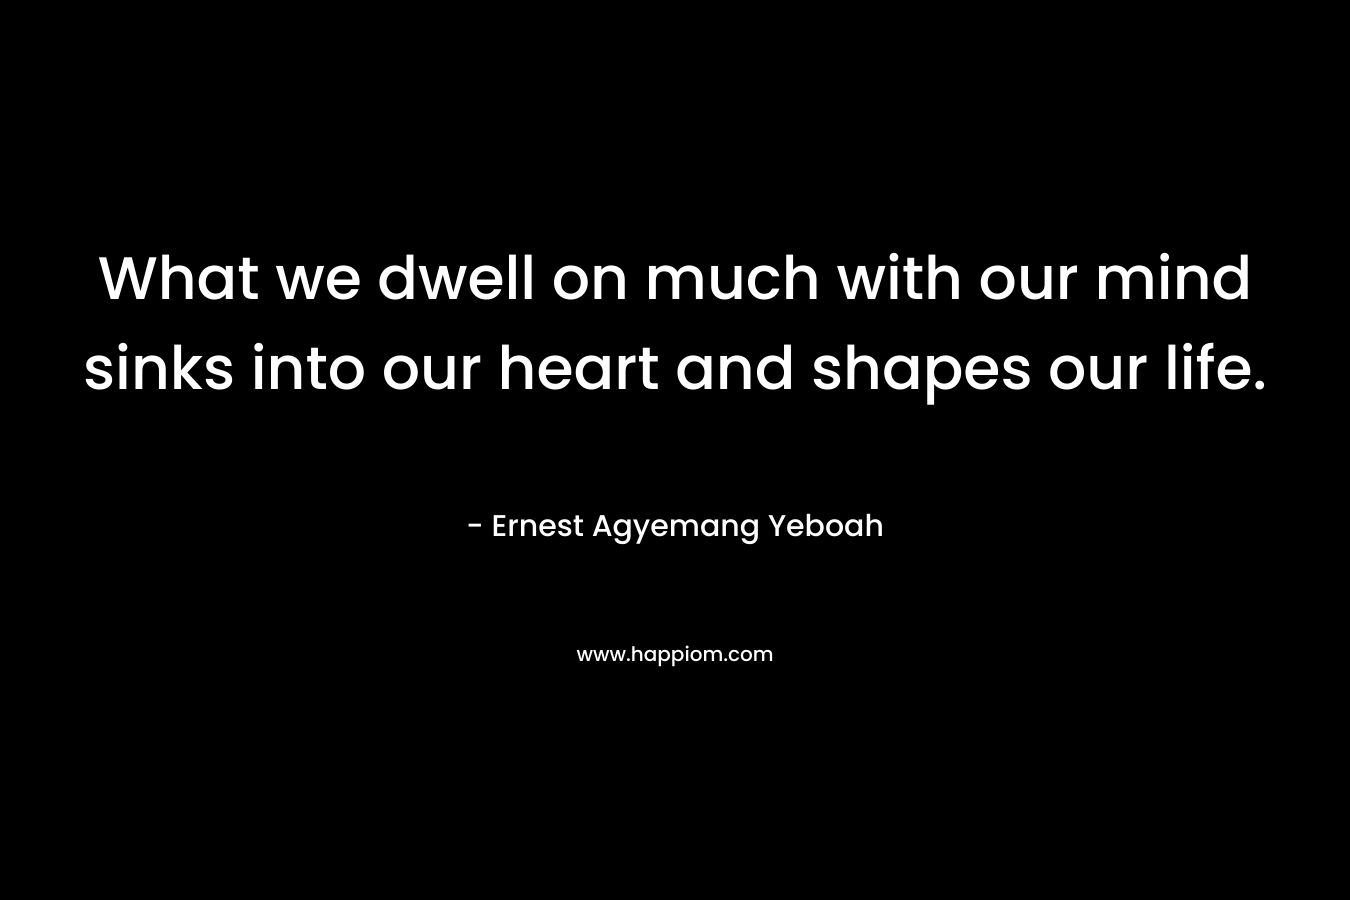 What we dwell on much with our mind sinks into our heart and shapes our life. – Ernest Agyemang Yeboah